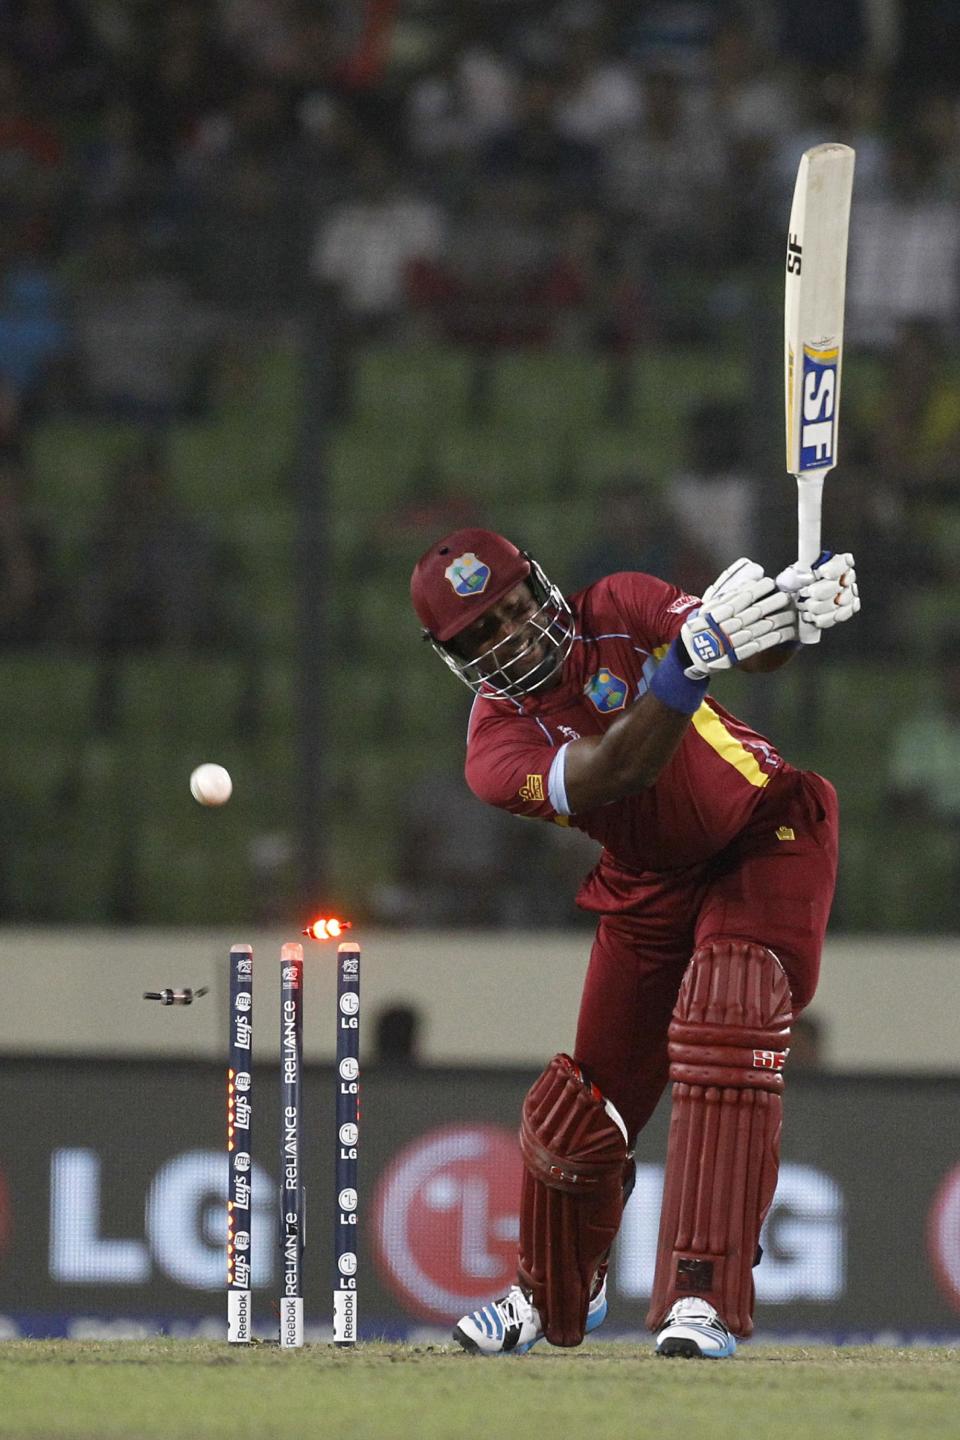 West Indies's Dwayne Smith is bowled out by Sri Lanka's Lasith Malinga during their ICC Twenty20 Cricket World Cup semi-final match in Dhaka, Bangladesh, Thursday, April 3, 2014.(AP Photo/A.M. Ahad)